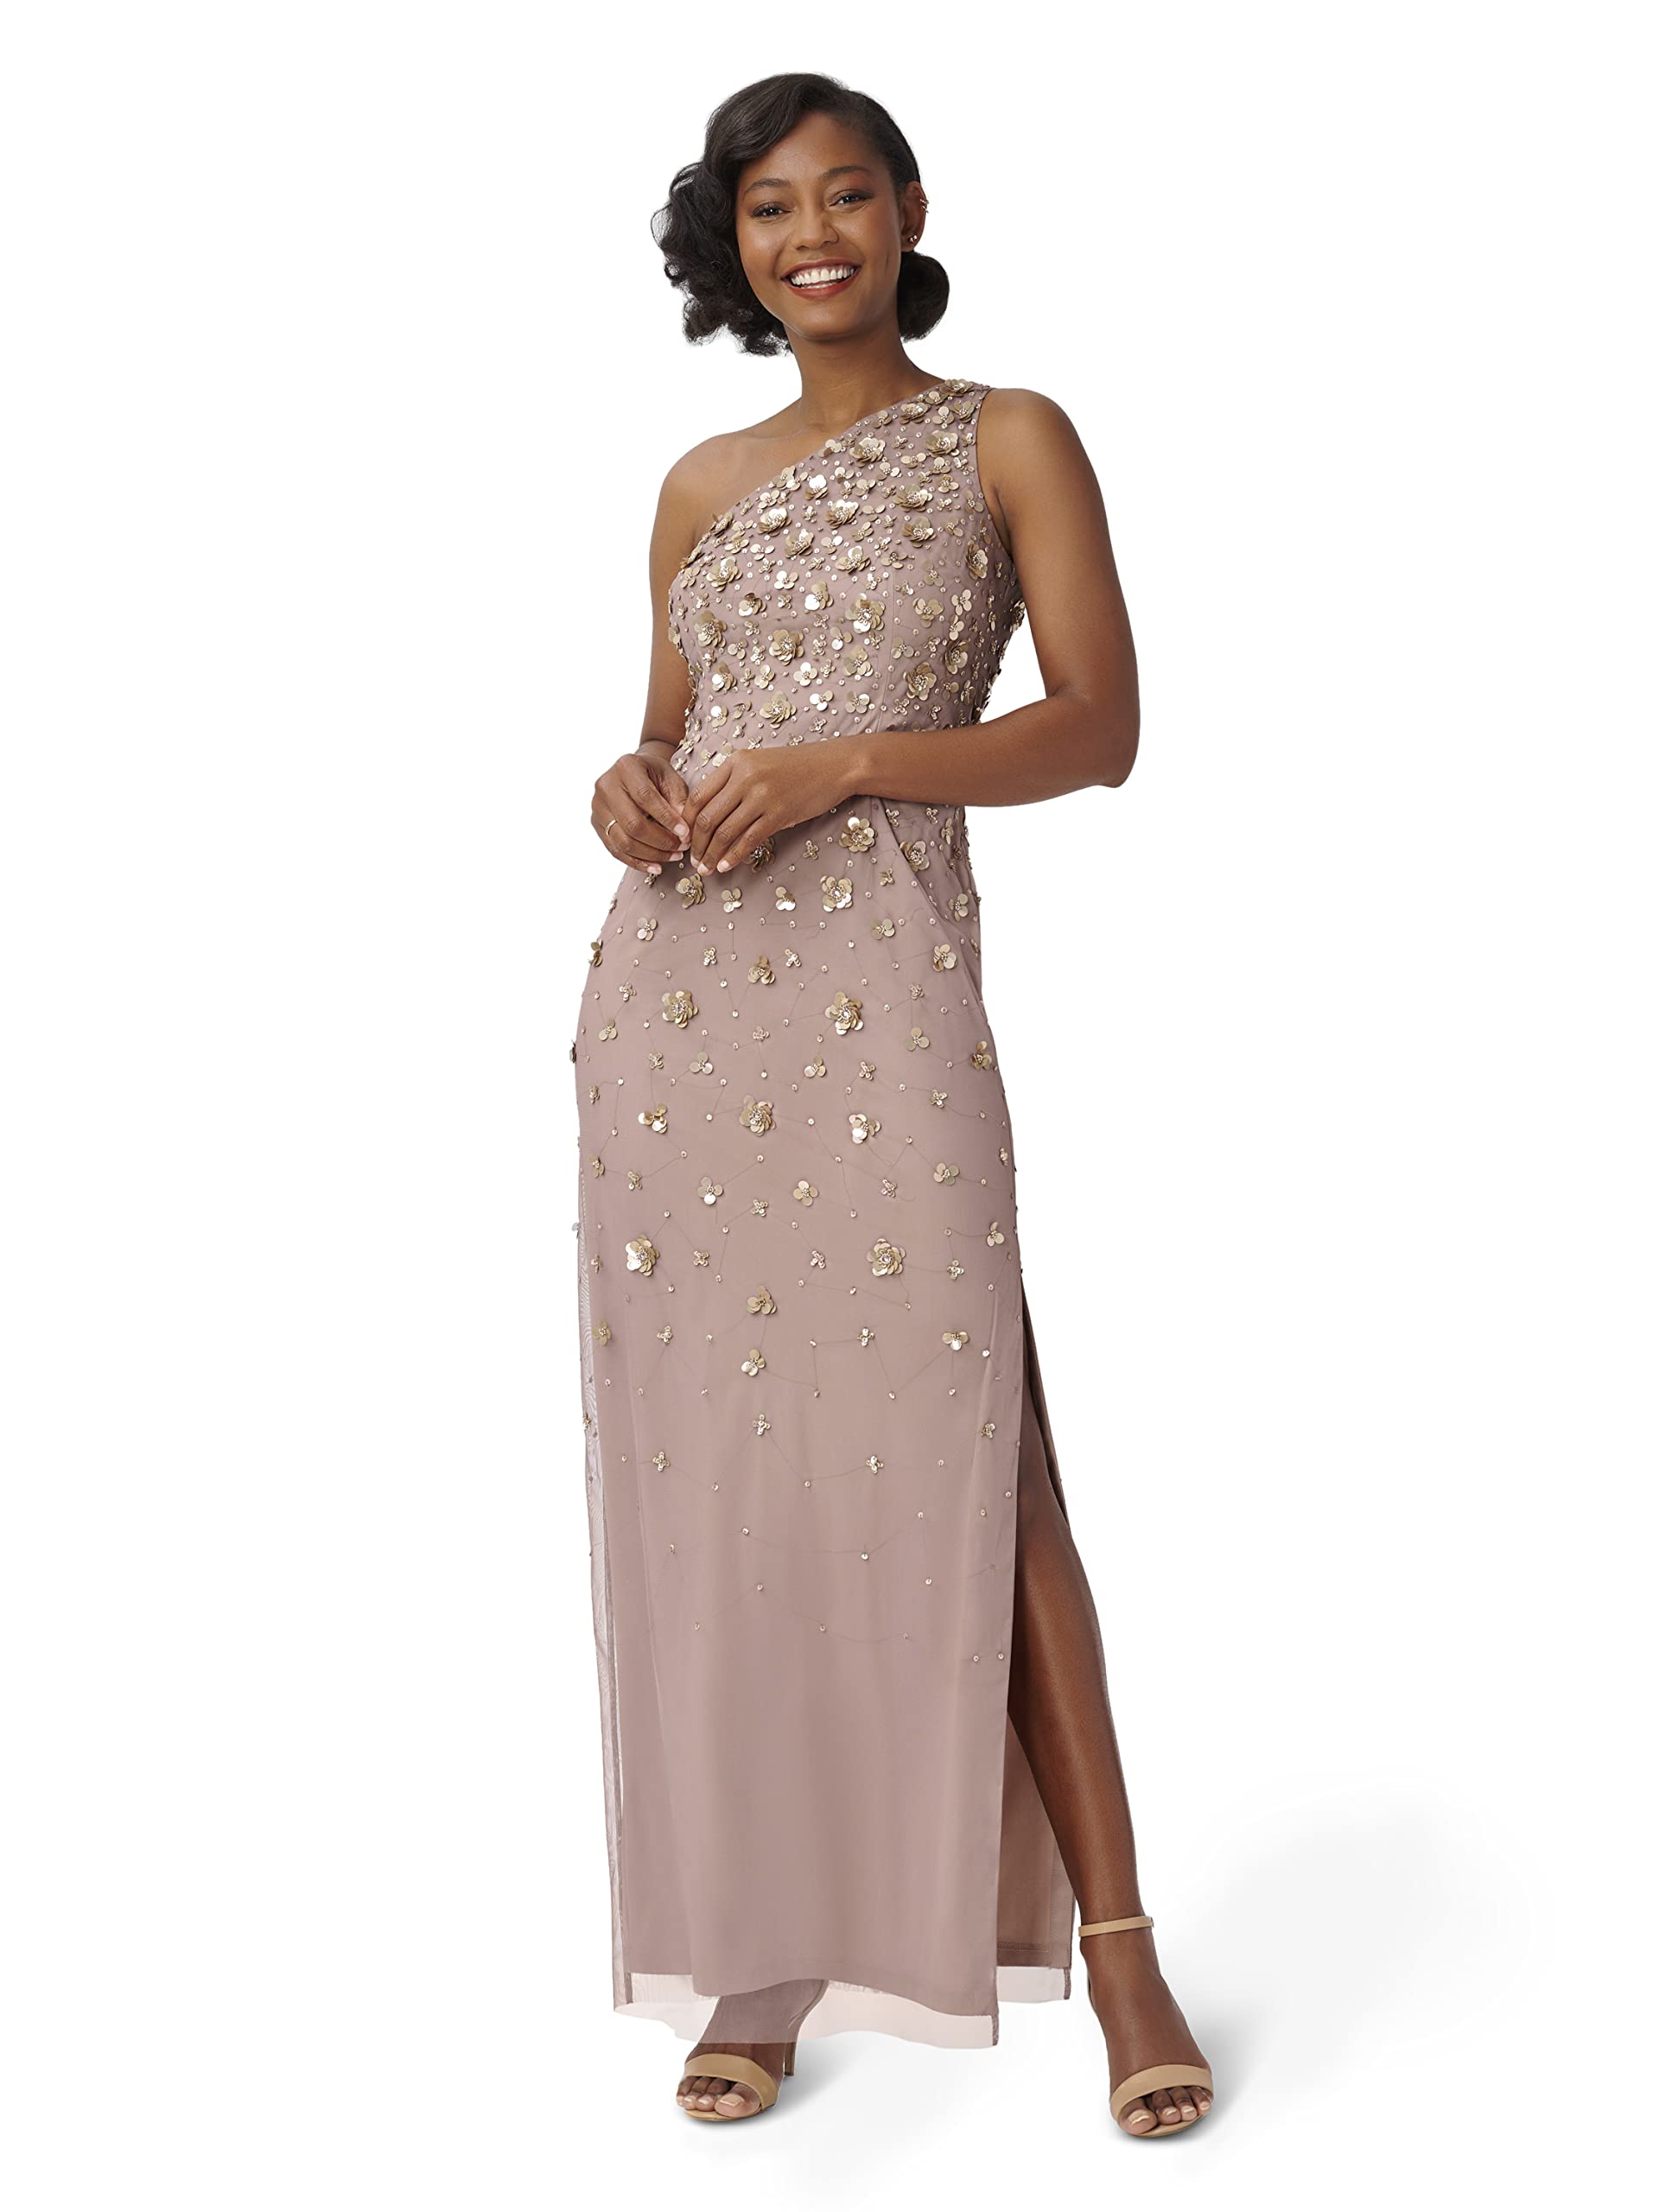 Adrianna Papell Women's One Shoulder Beaded Gown